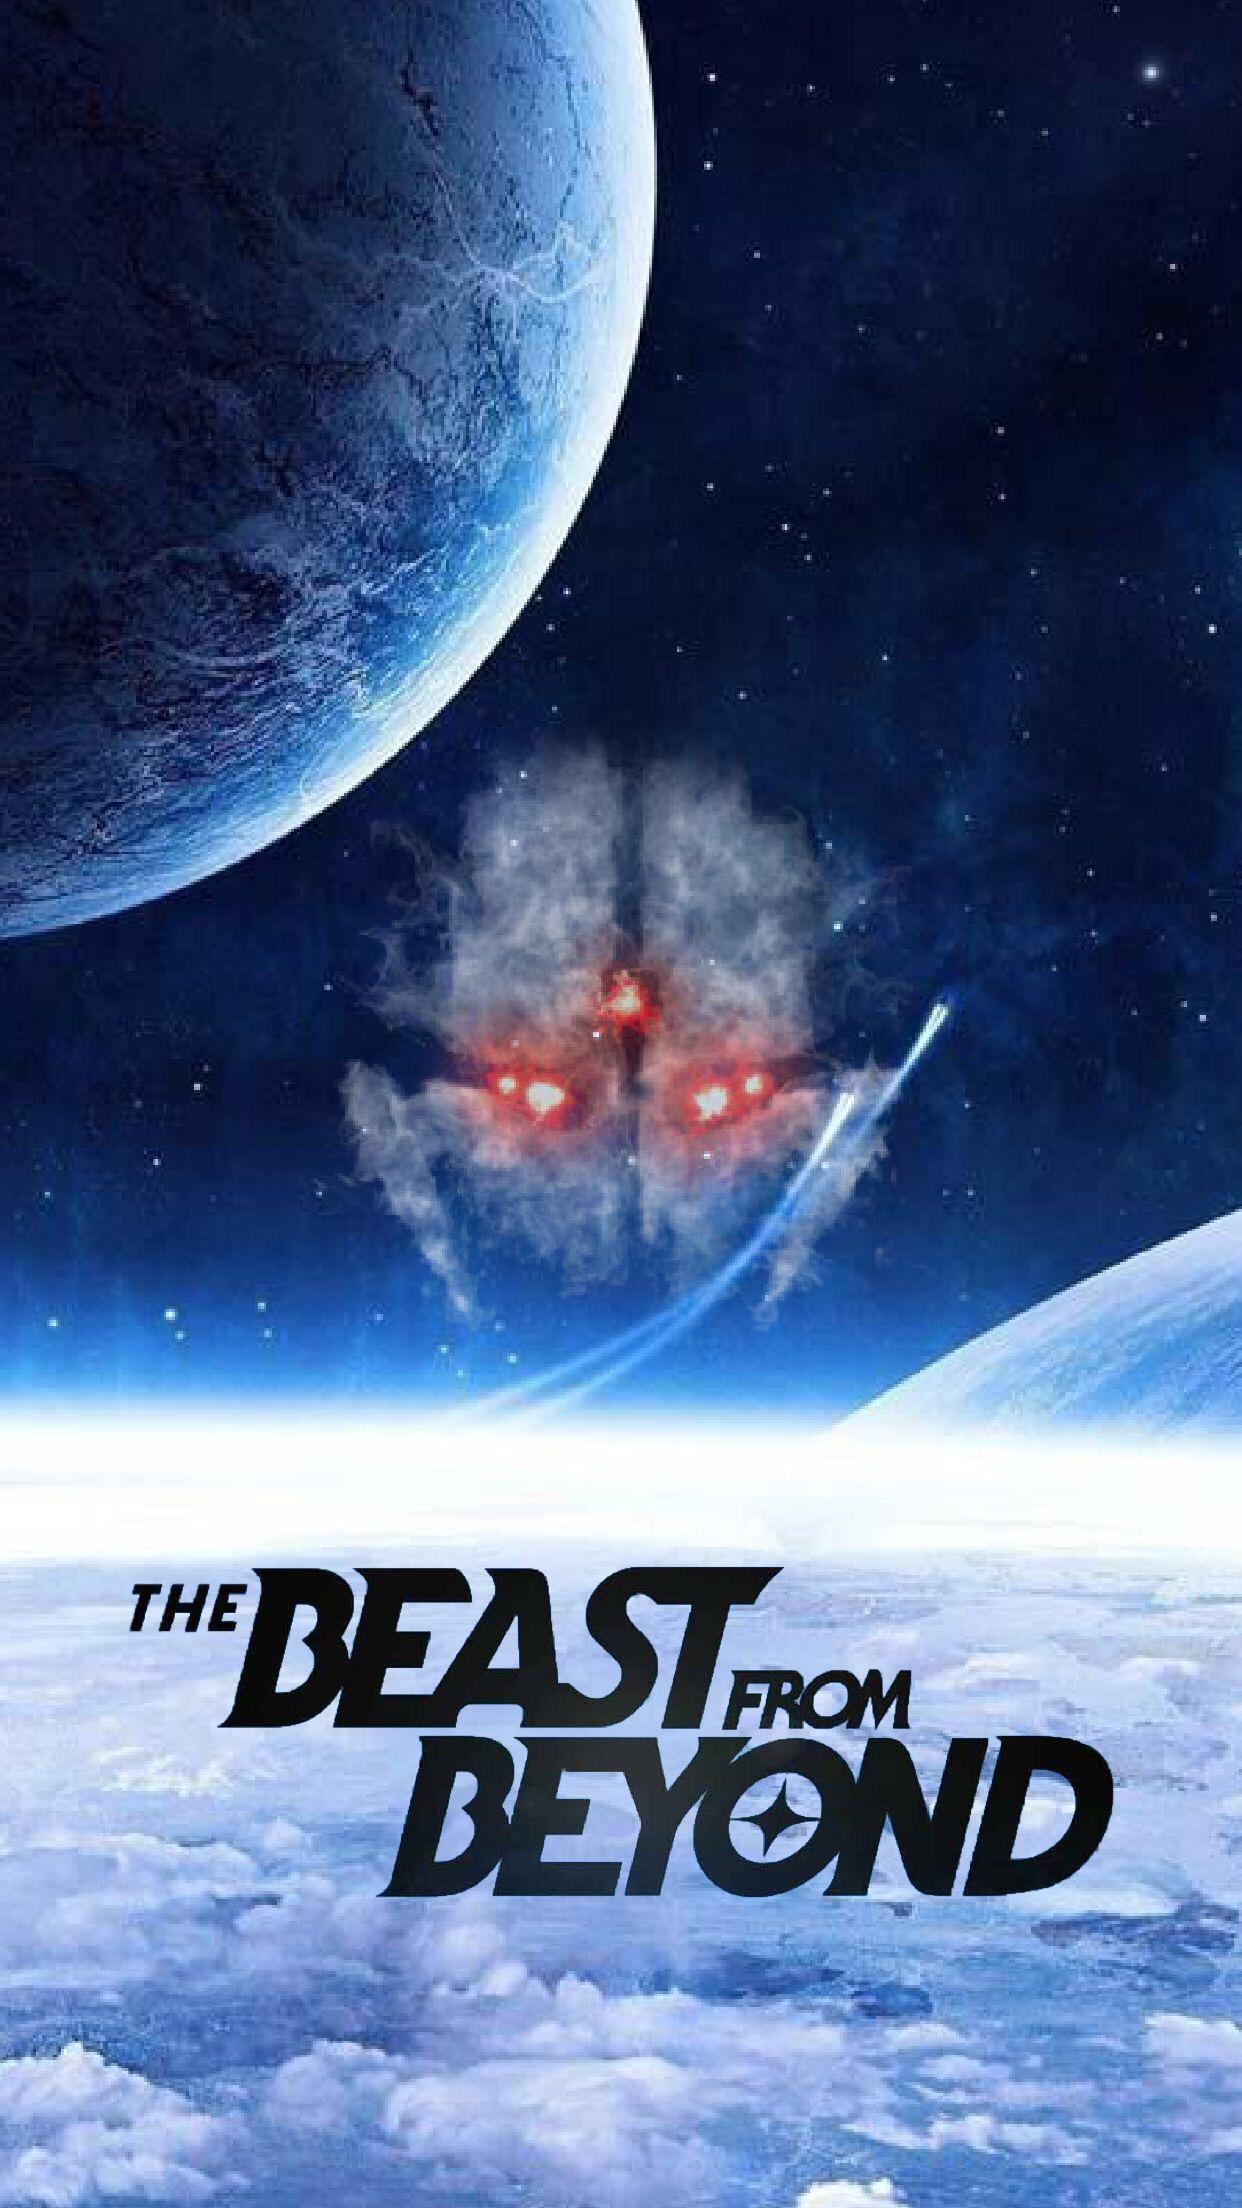 Just a quick little The Beast From Beyond wallpaper I made